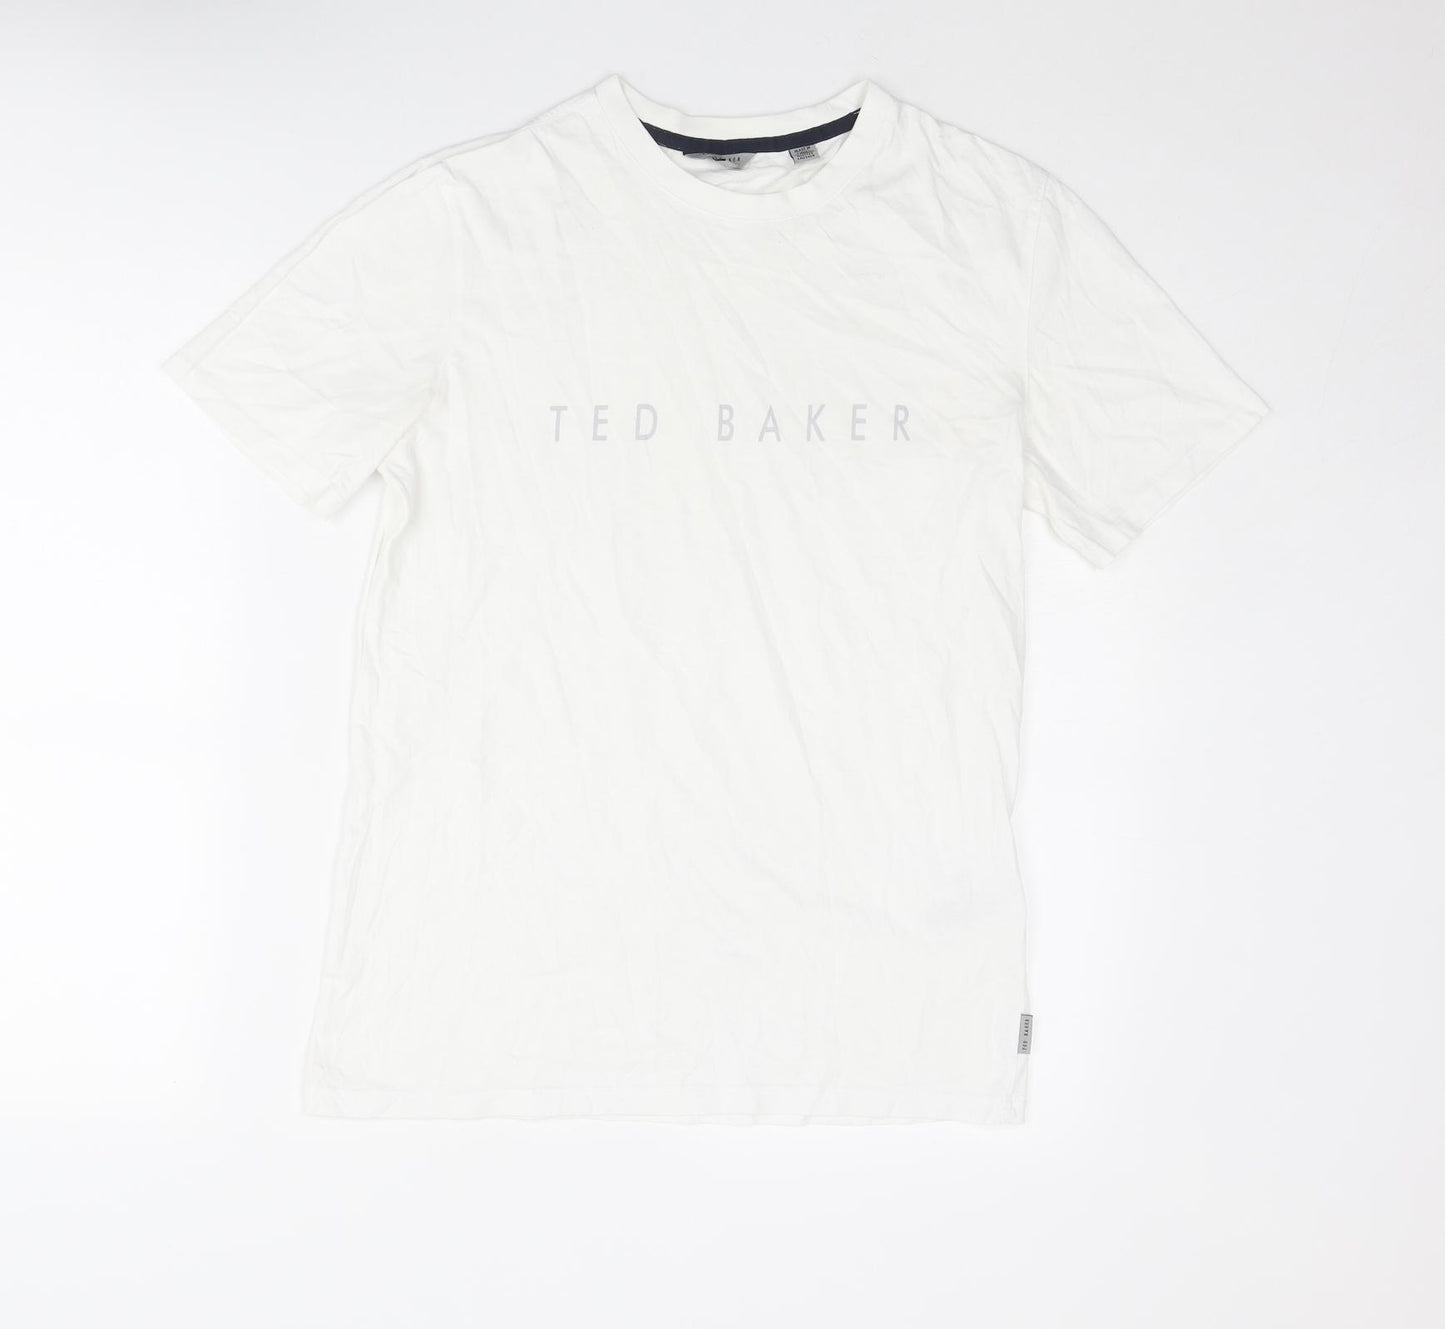 Ted Baker Mens White Cotton T-Shirt Size S Crew Neck